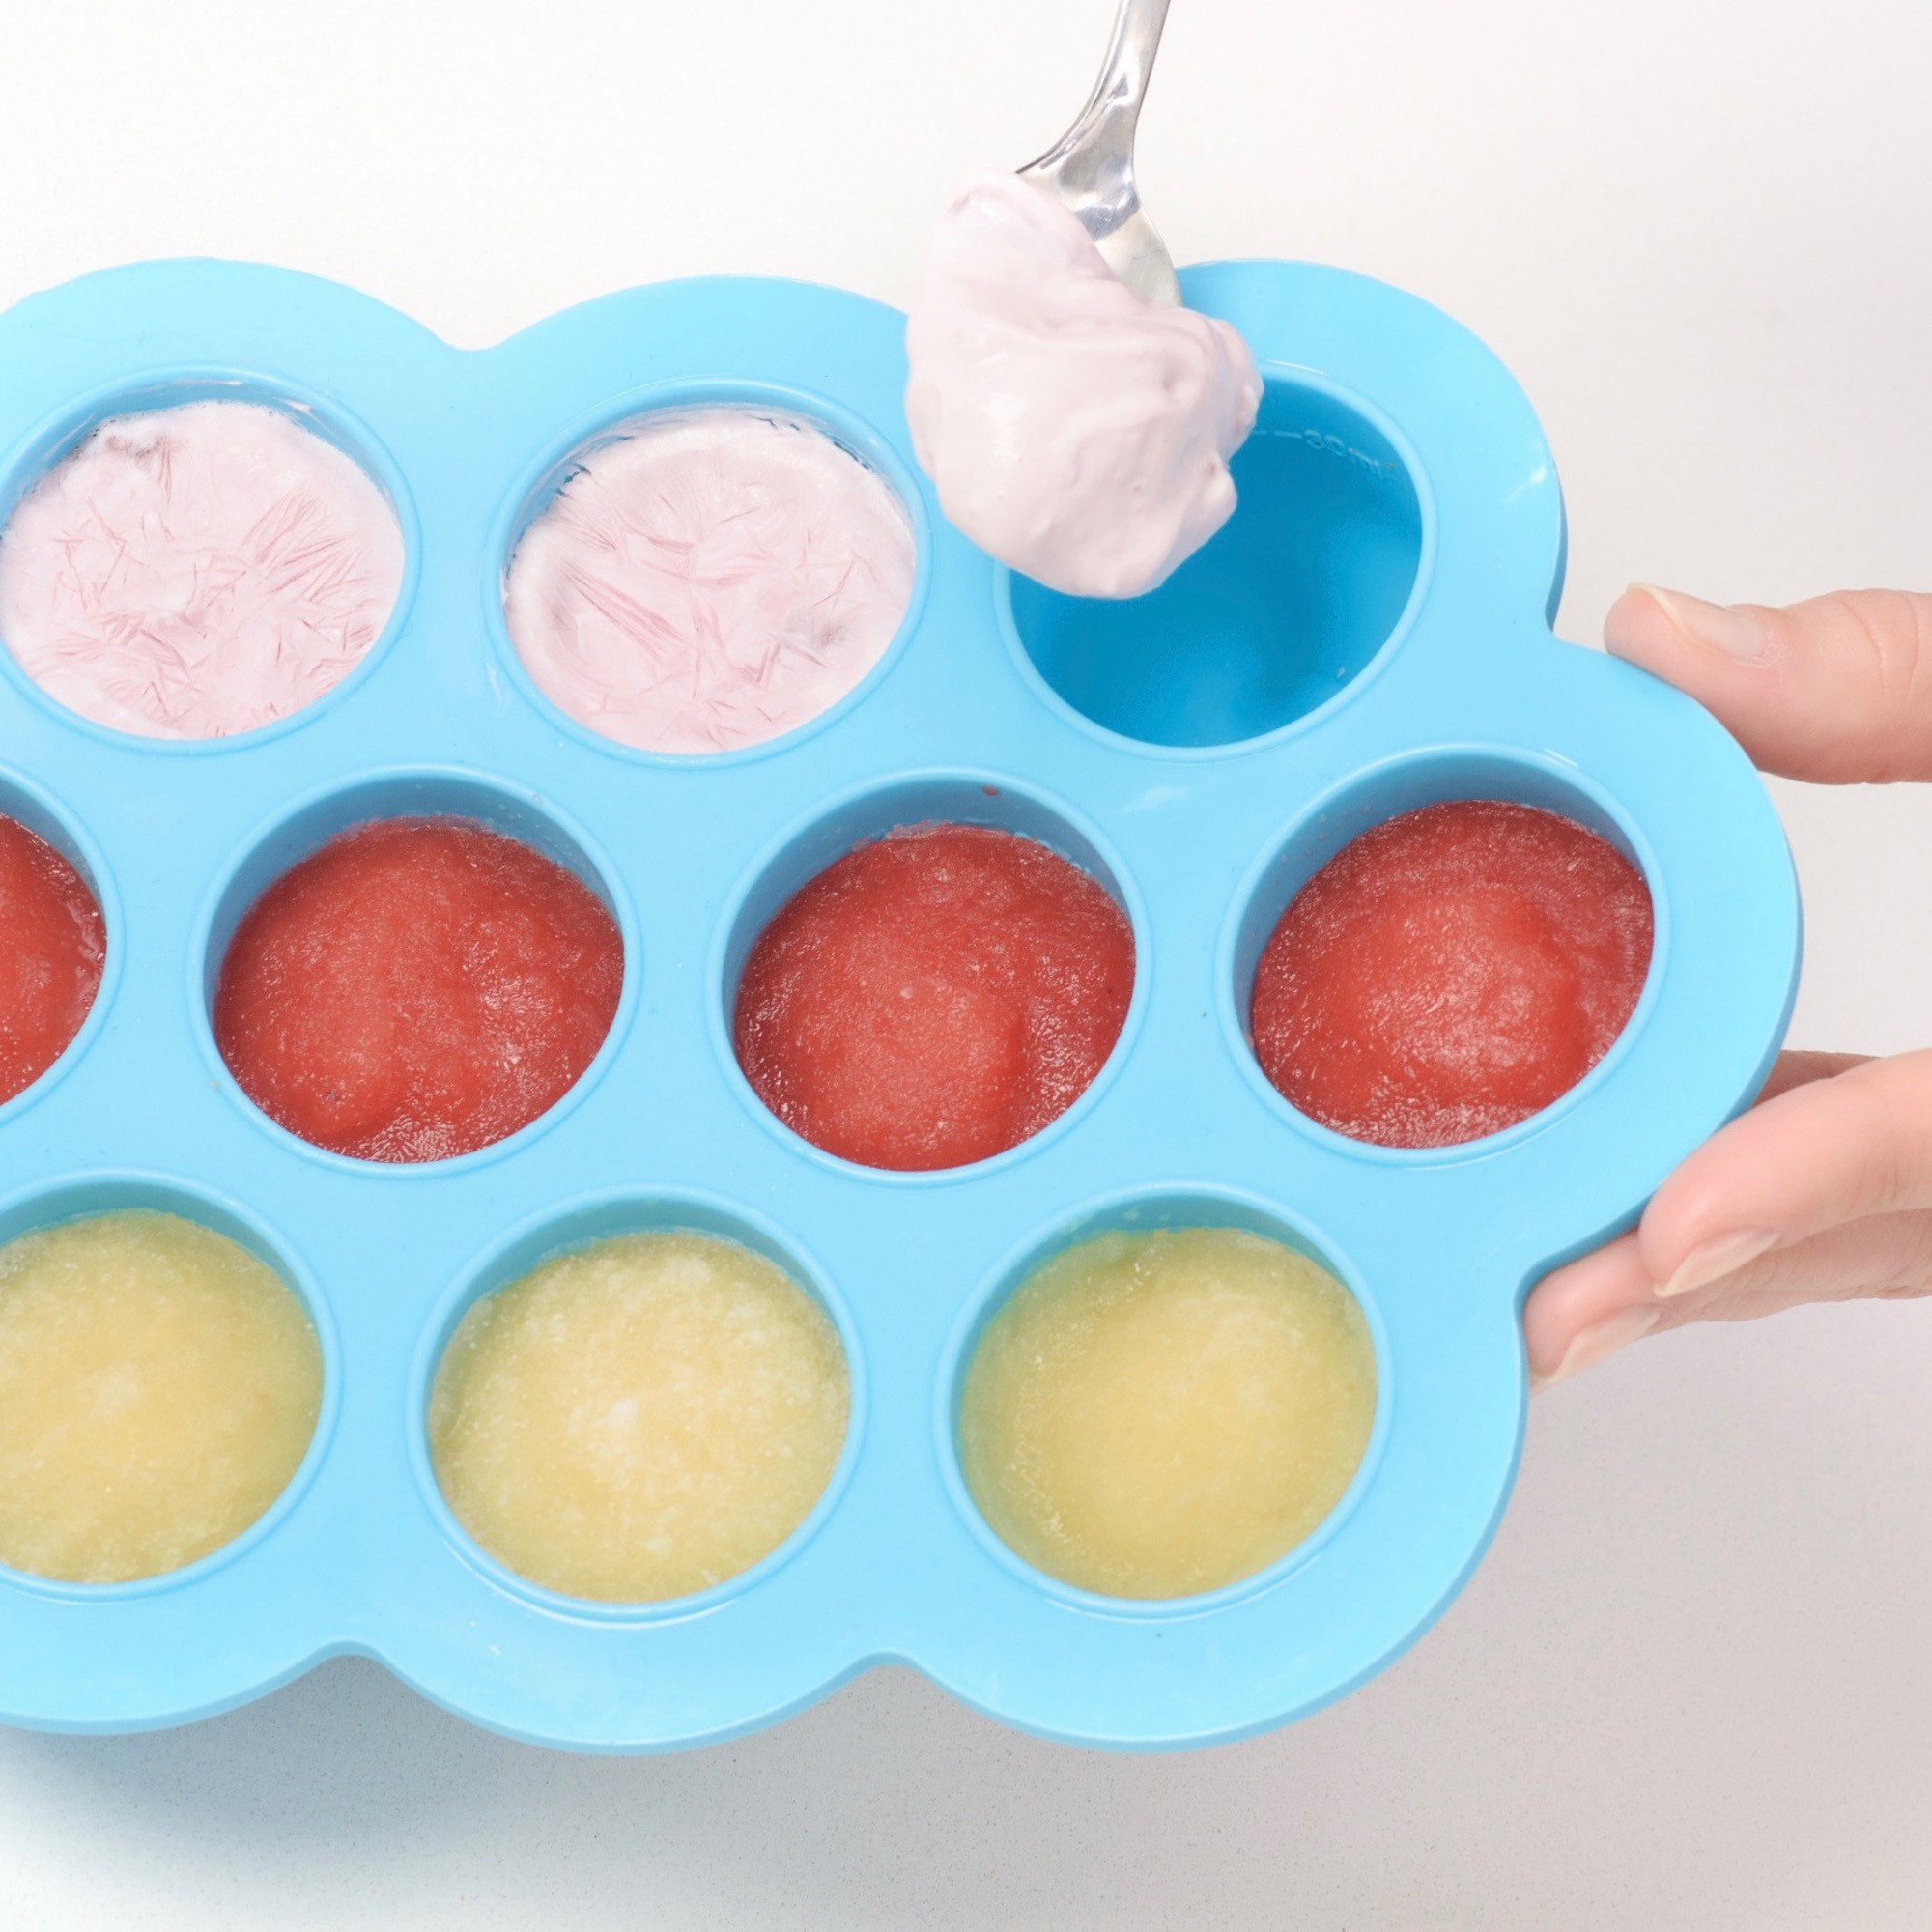 WeeSprout Silicone Baby Food Freezer Tray